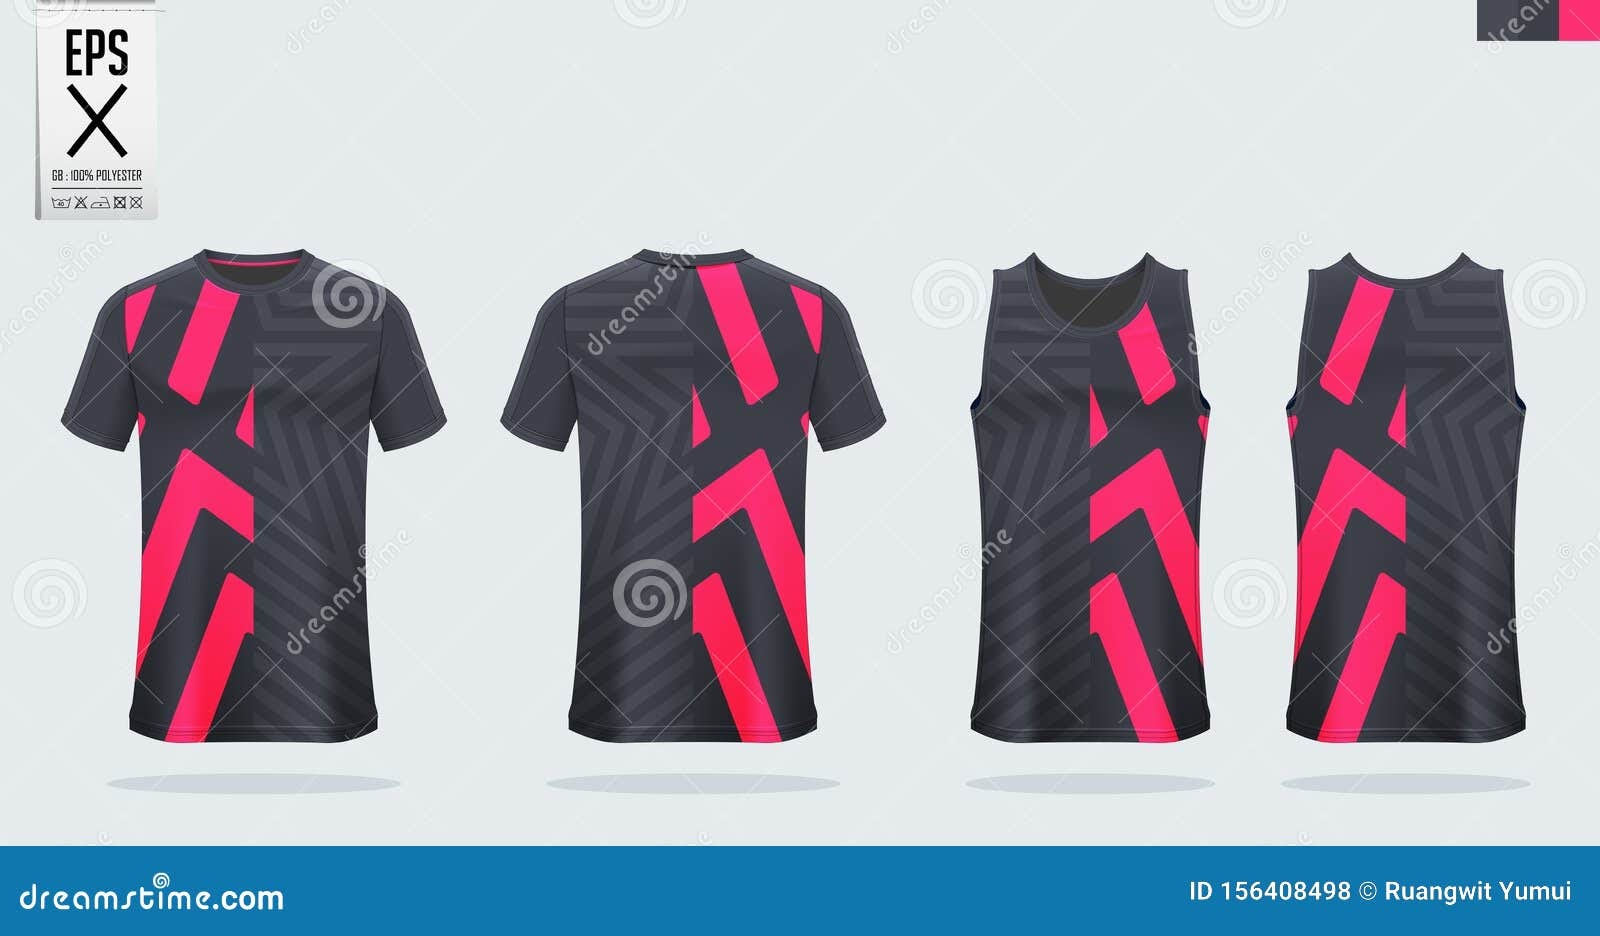 Download Yellowimages Mockups Running Jersey Mockup Free Branding Mockups - Free PSD Mockups Smart Object ...